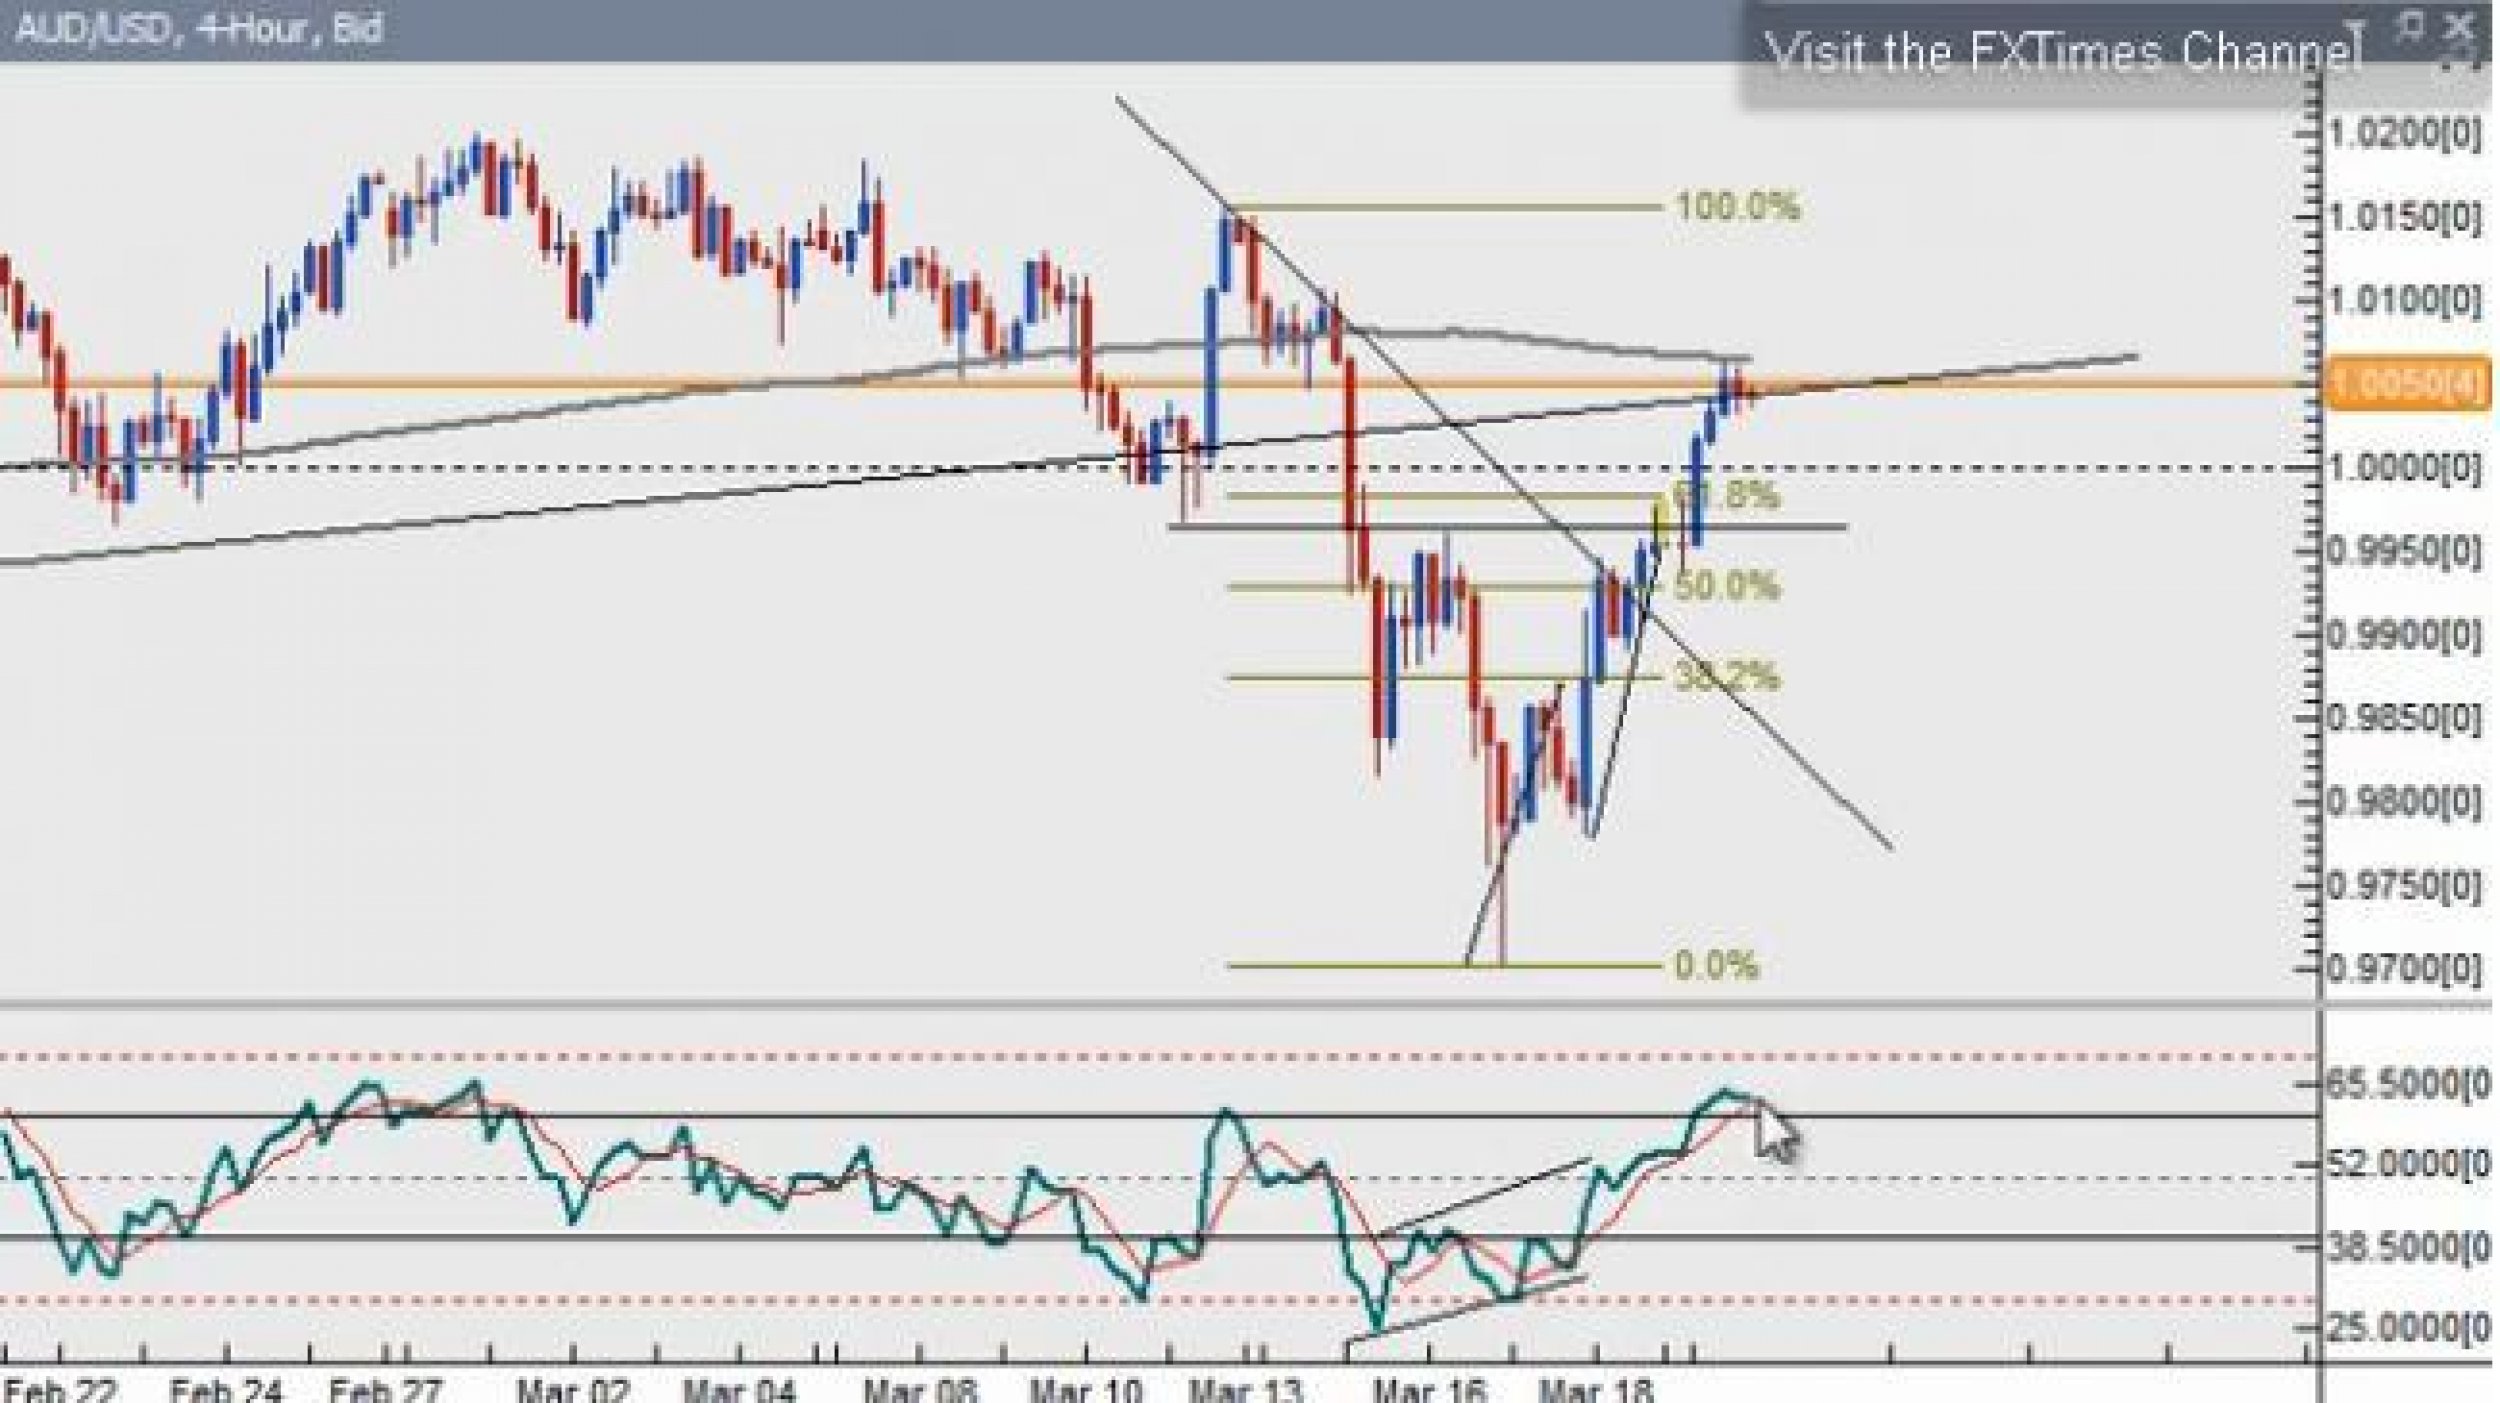 Forex Technical Update 3212011 - Some Setups in the Forex Markets